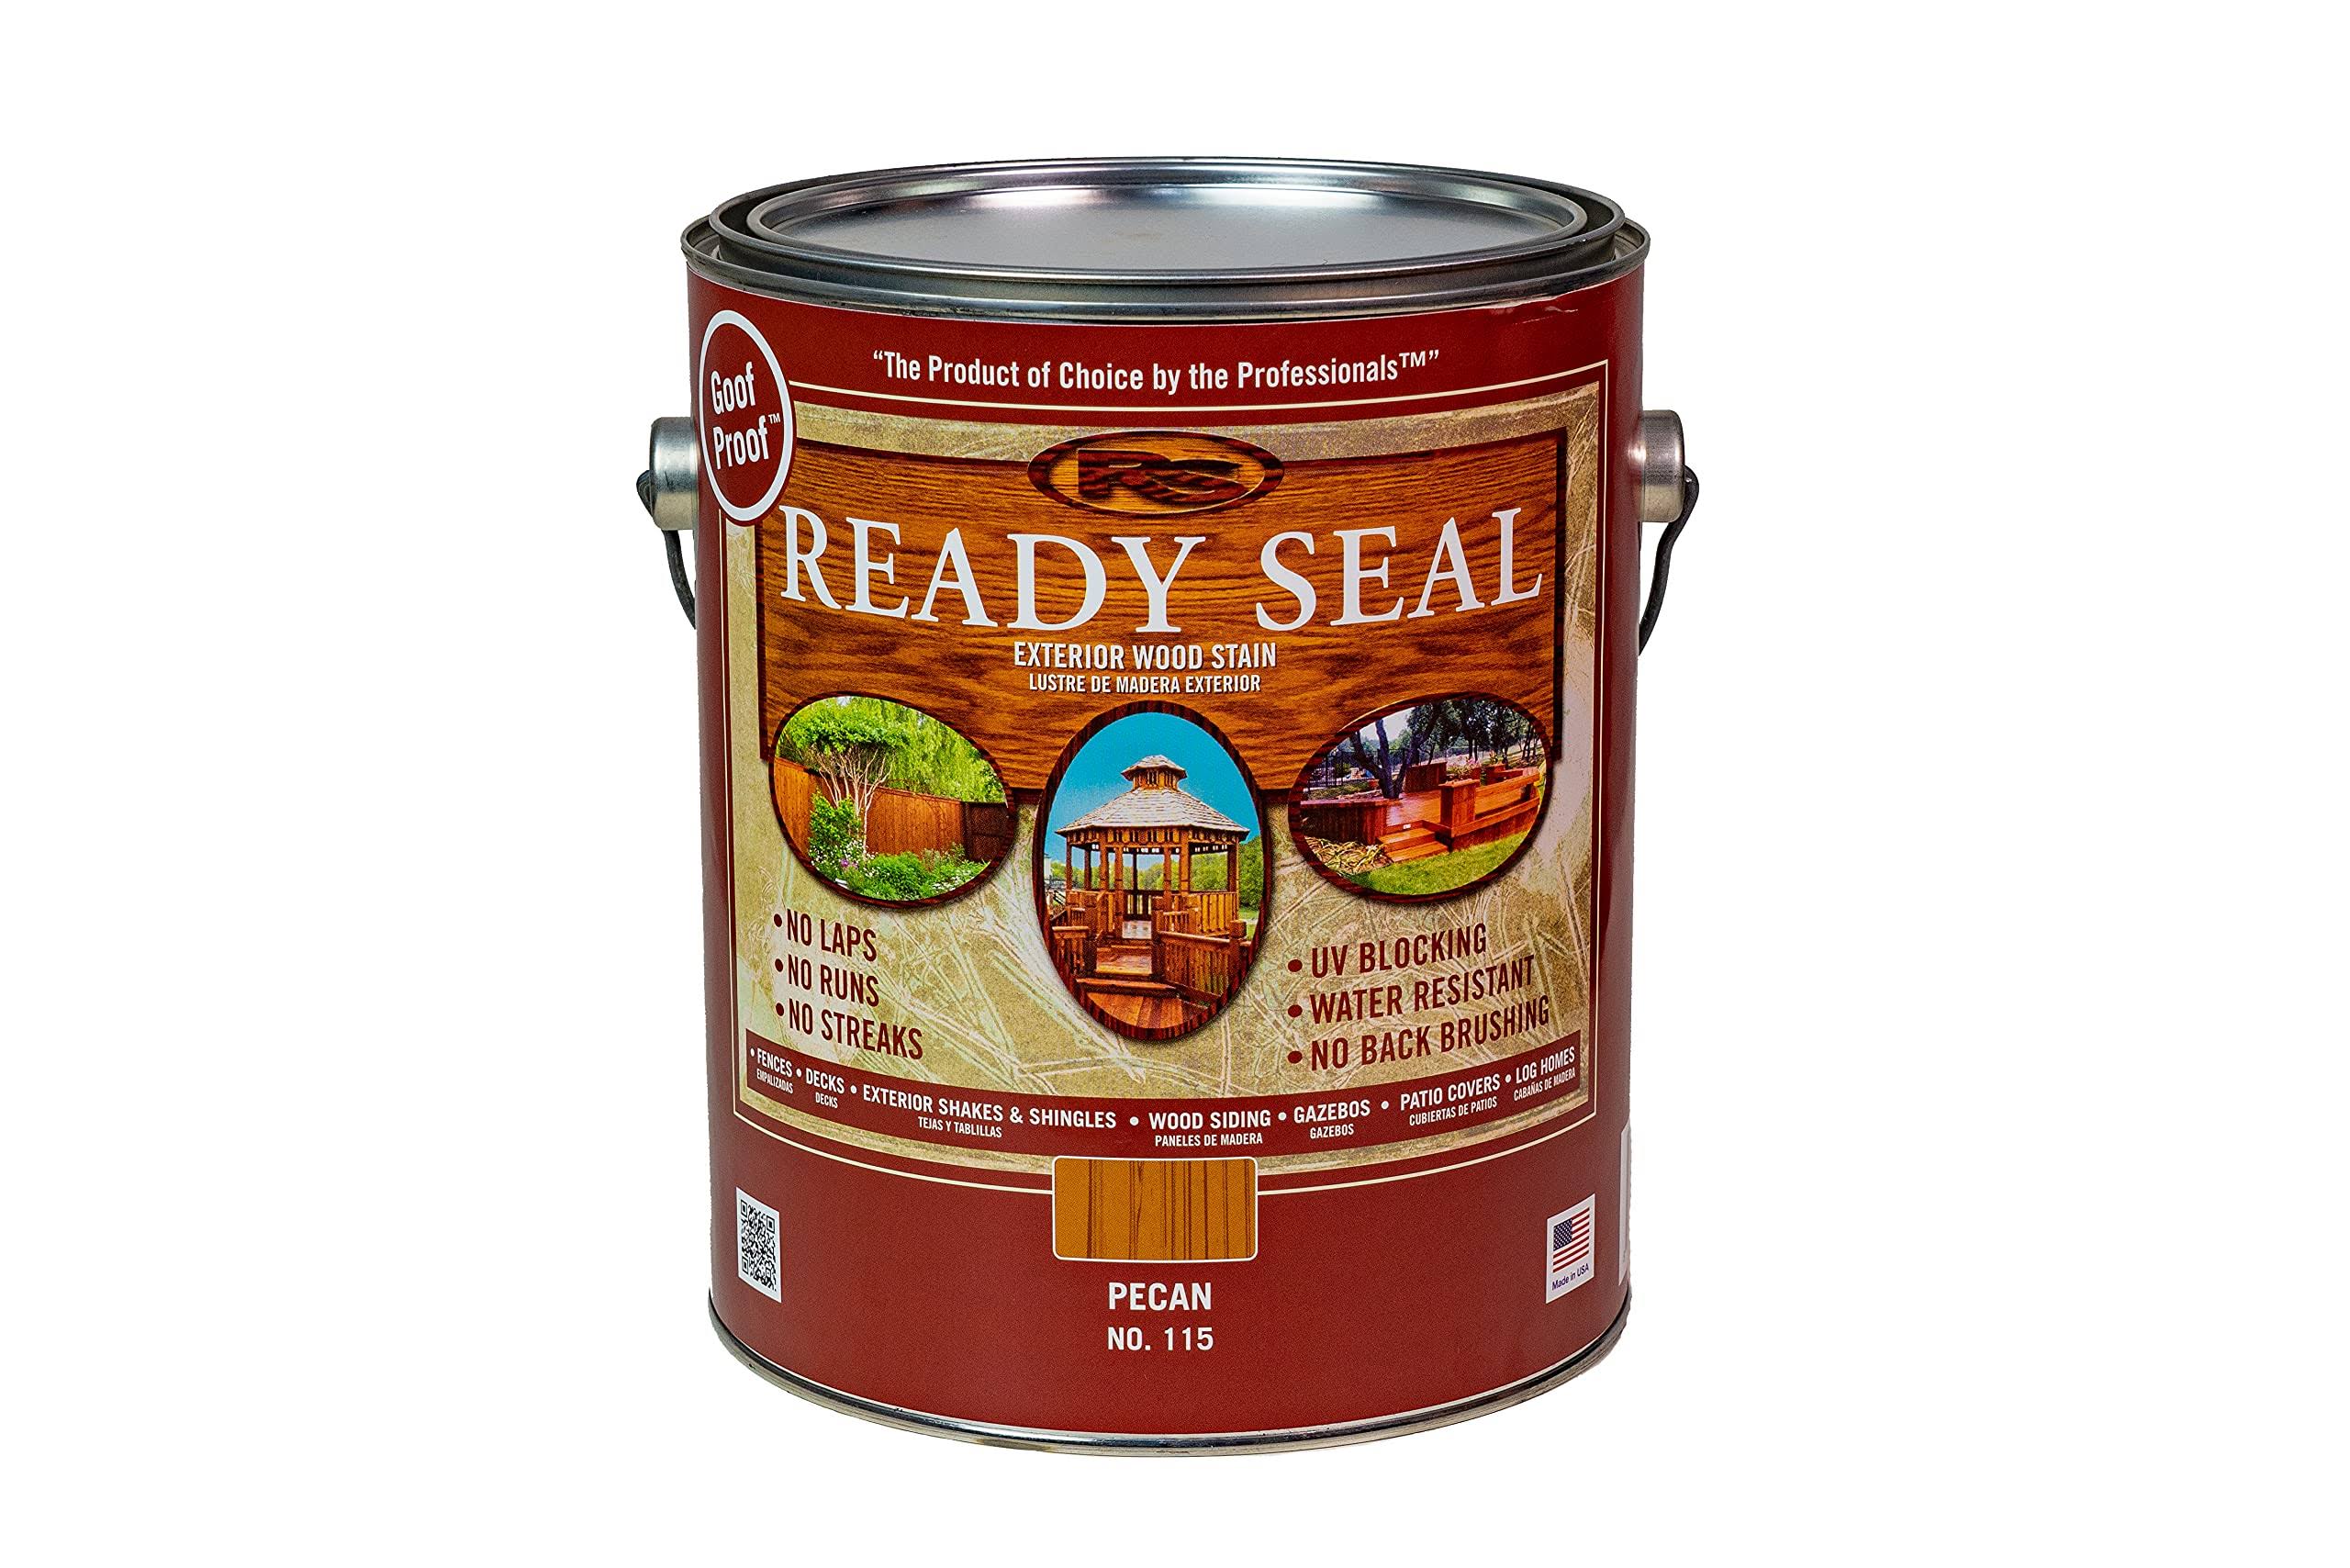 Ready Seal Exterior Wood Stain and Sealer - 1gal, Pecan